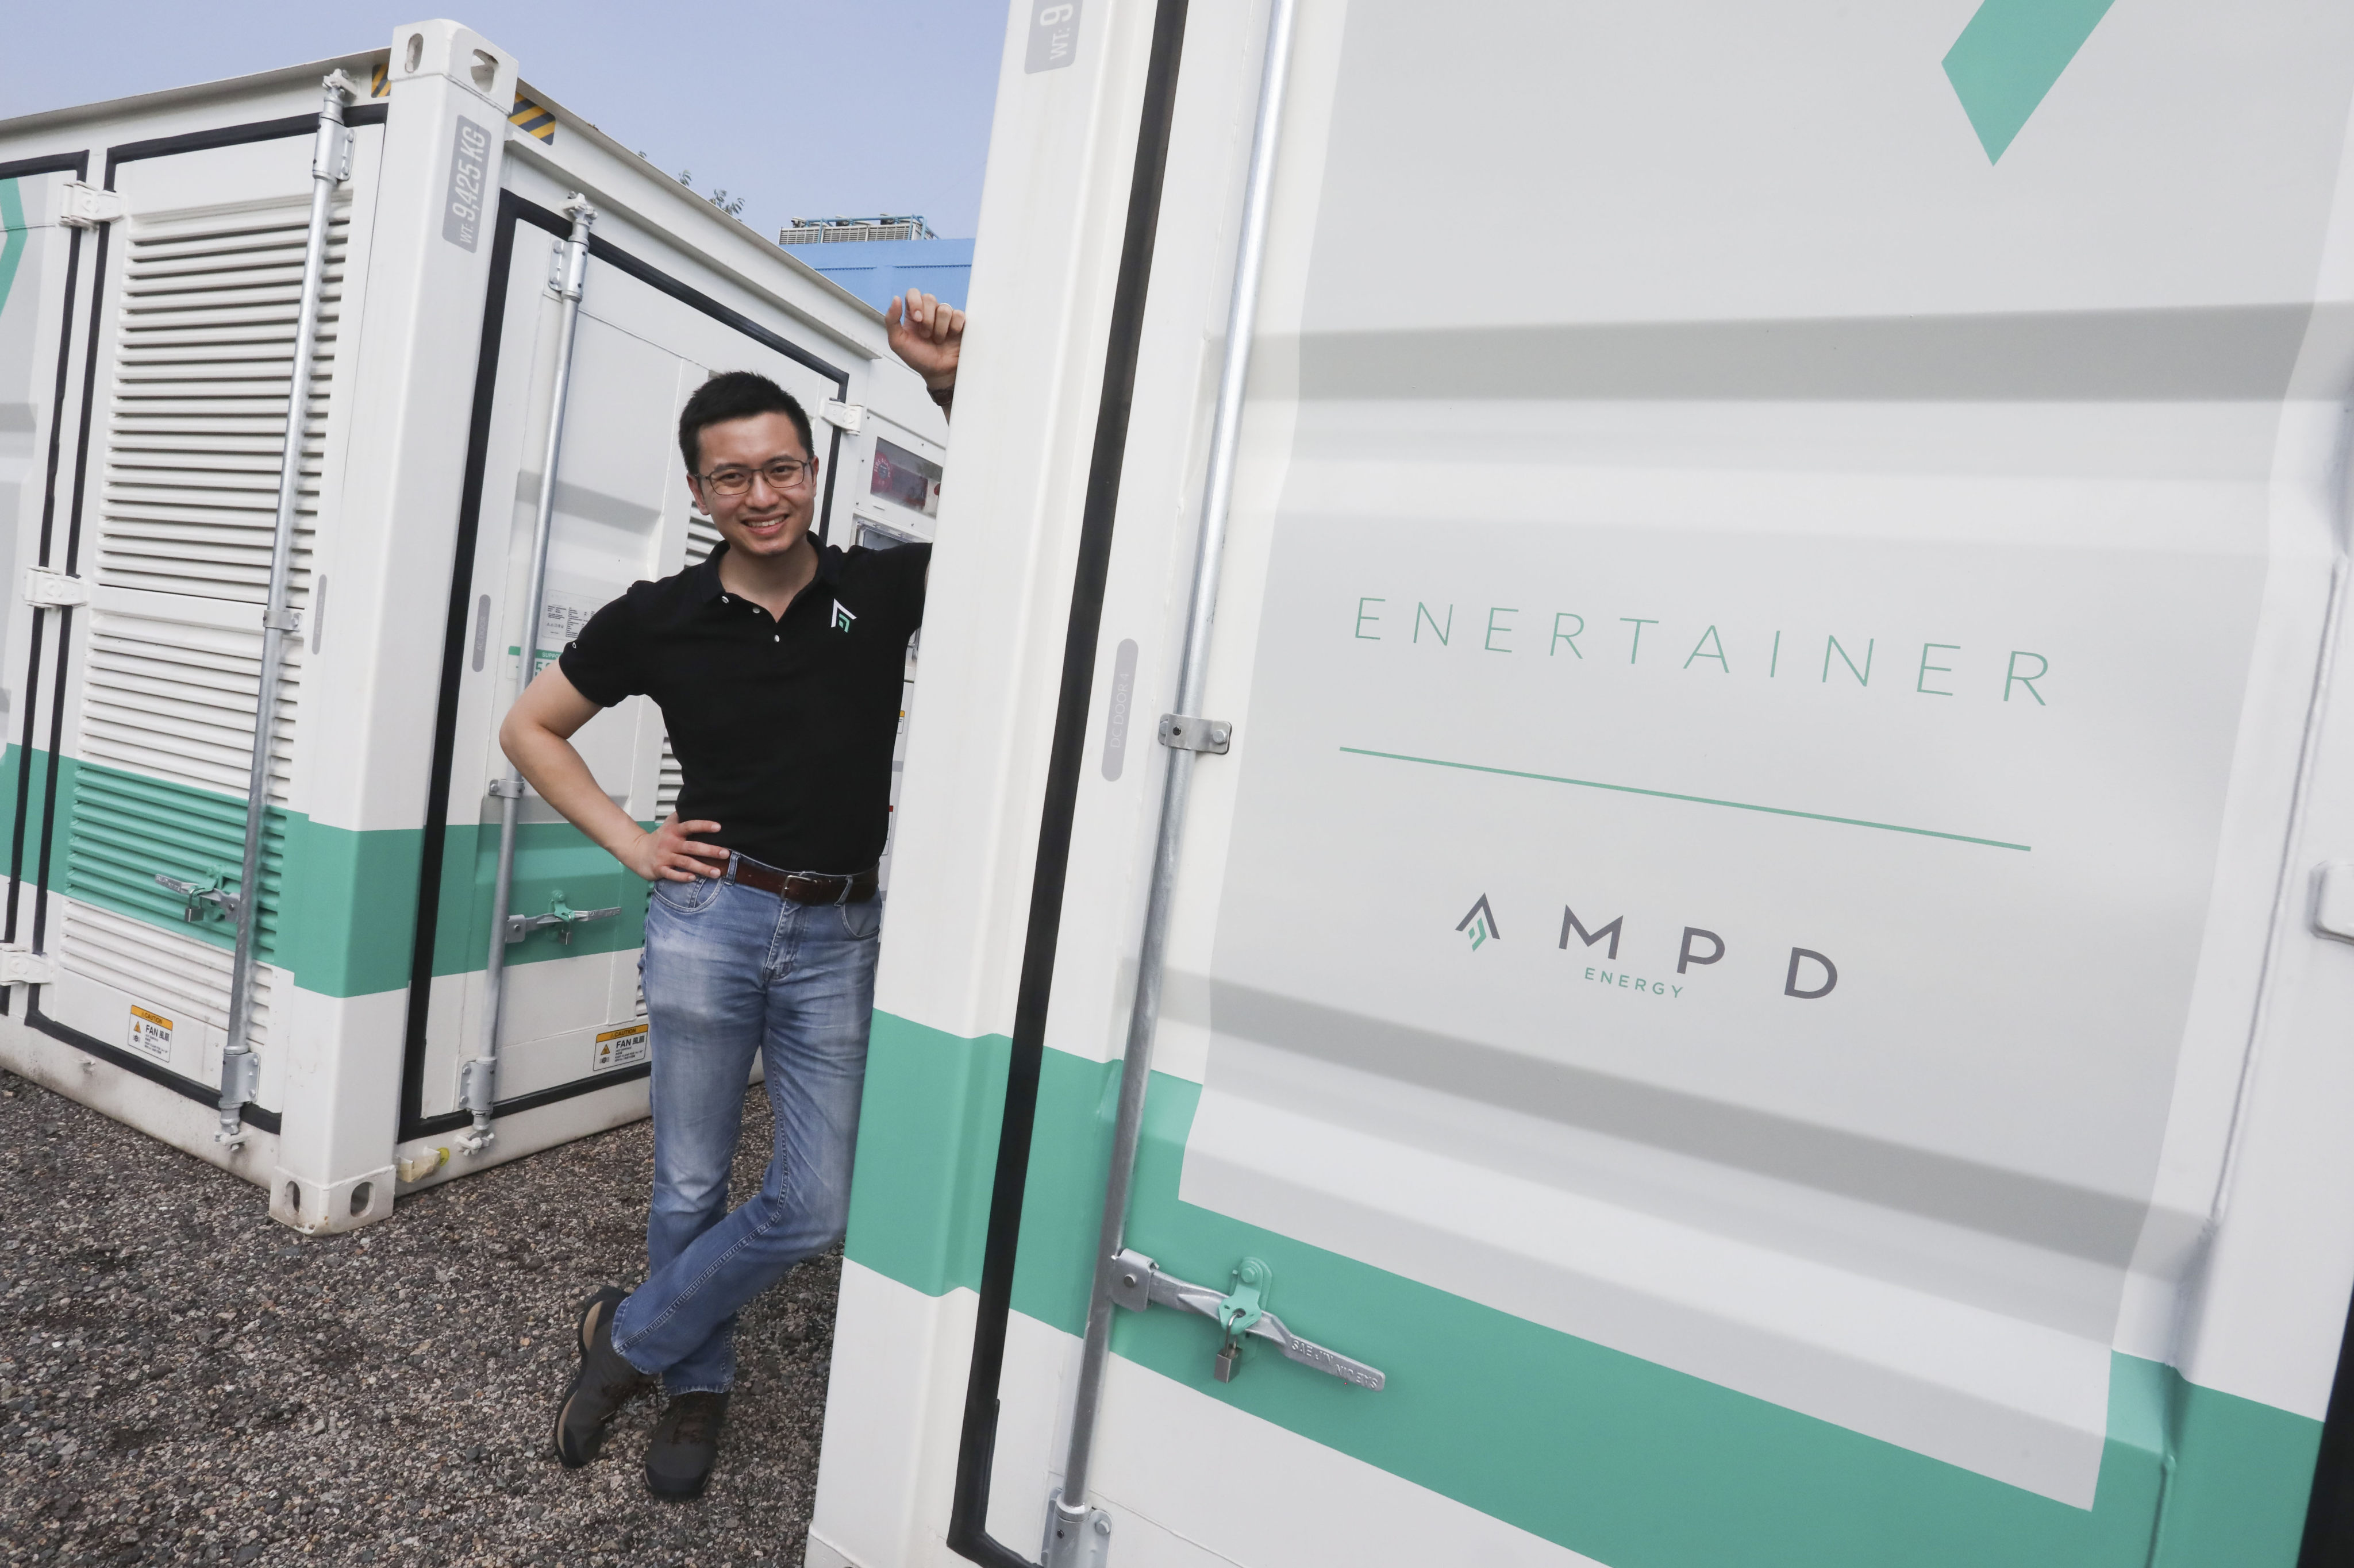 Ampd Energy’s CEO Brandon Ng with an AMPD Enertainer, which has been nominated for Prince William’s Earthshot Prize. Photo: Jonathan Wong